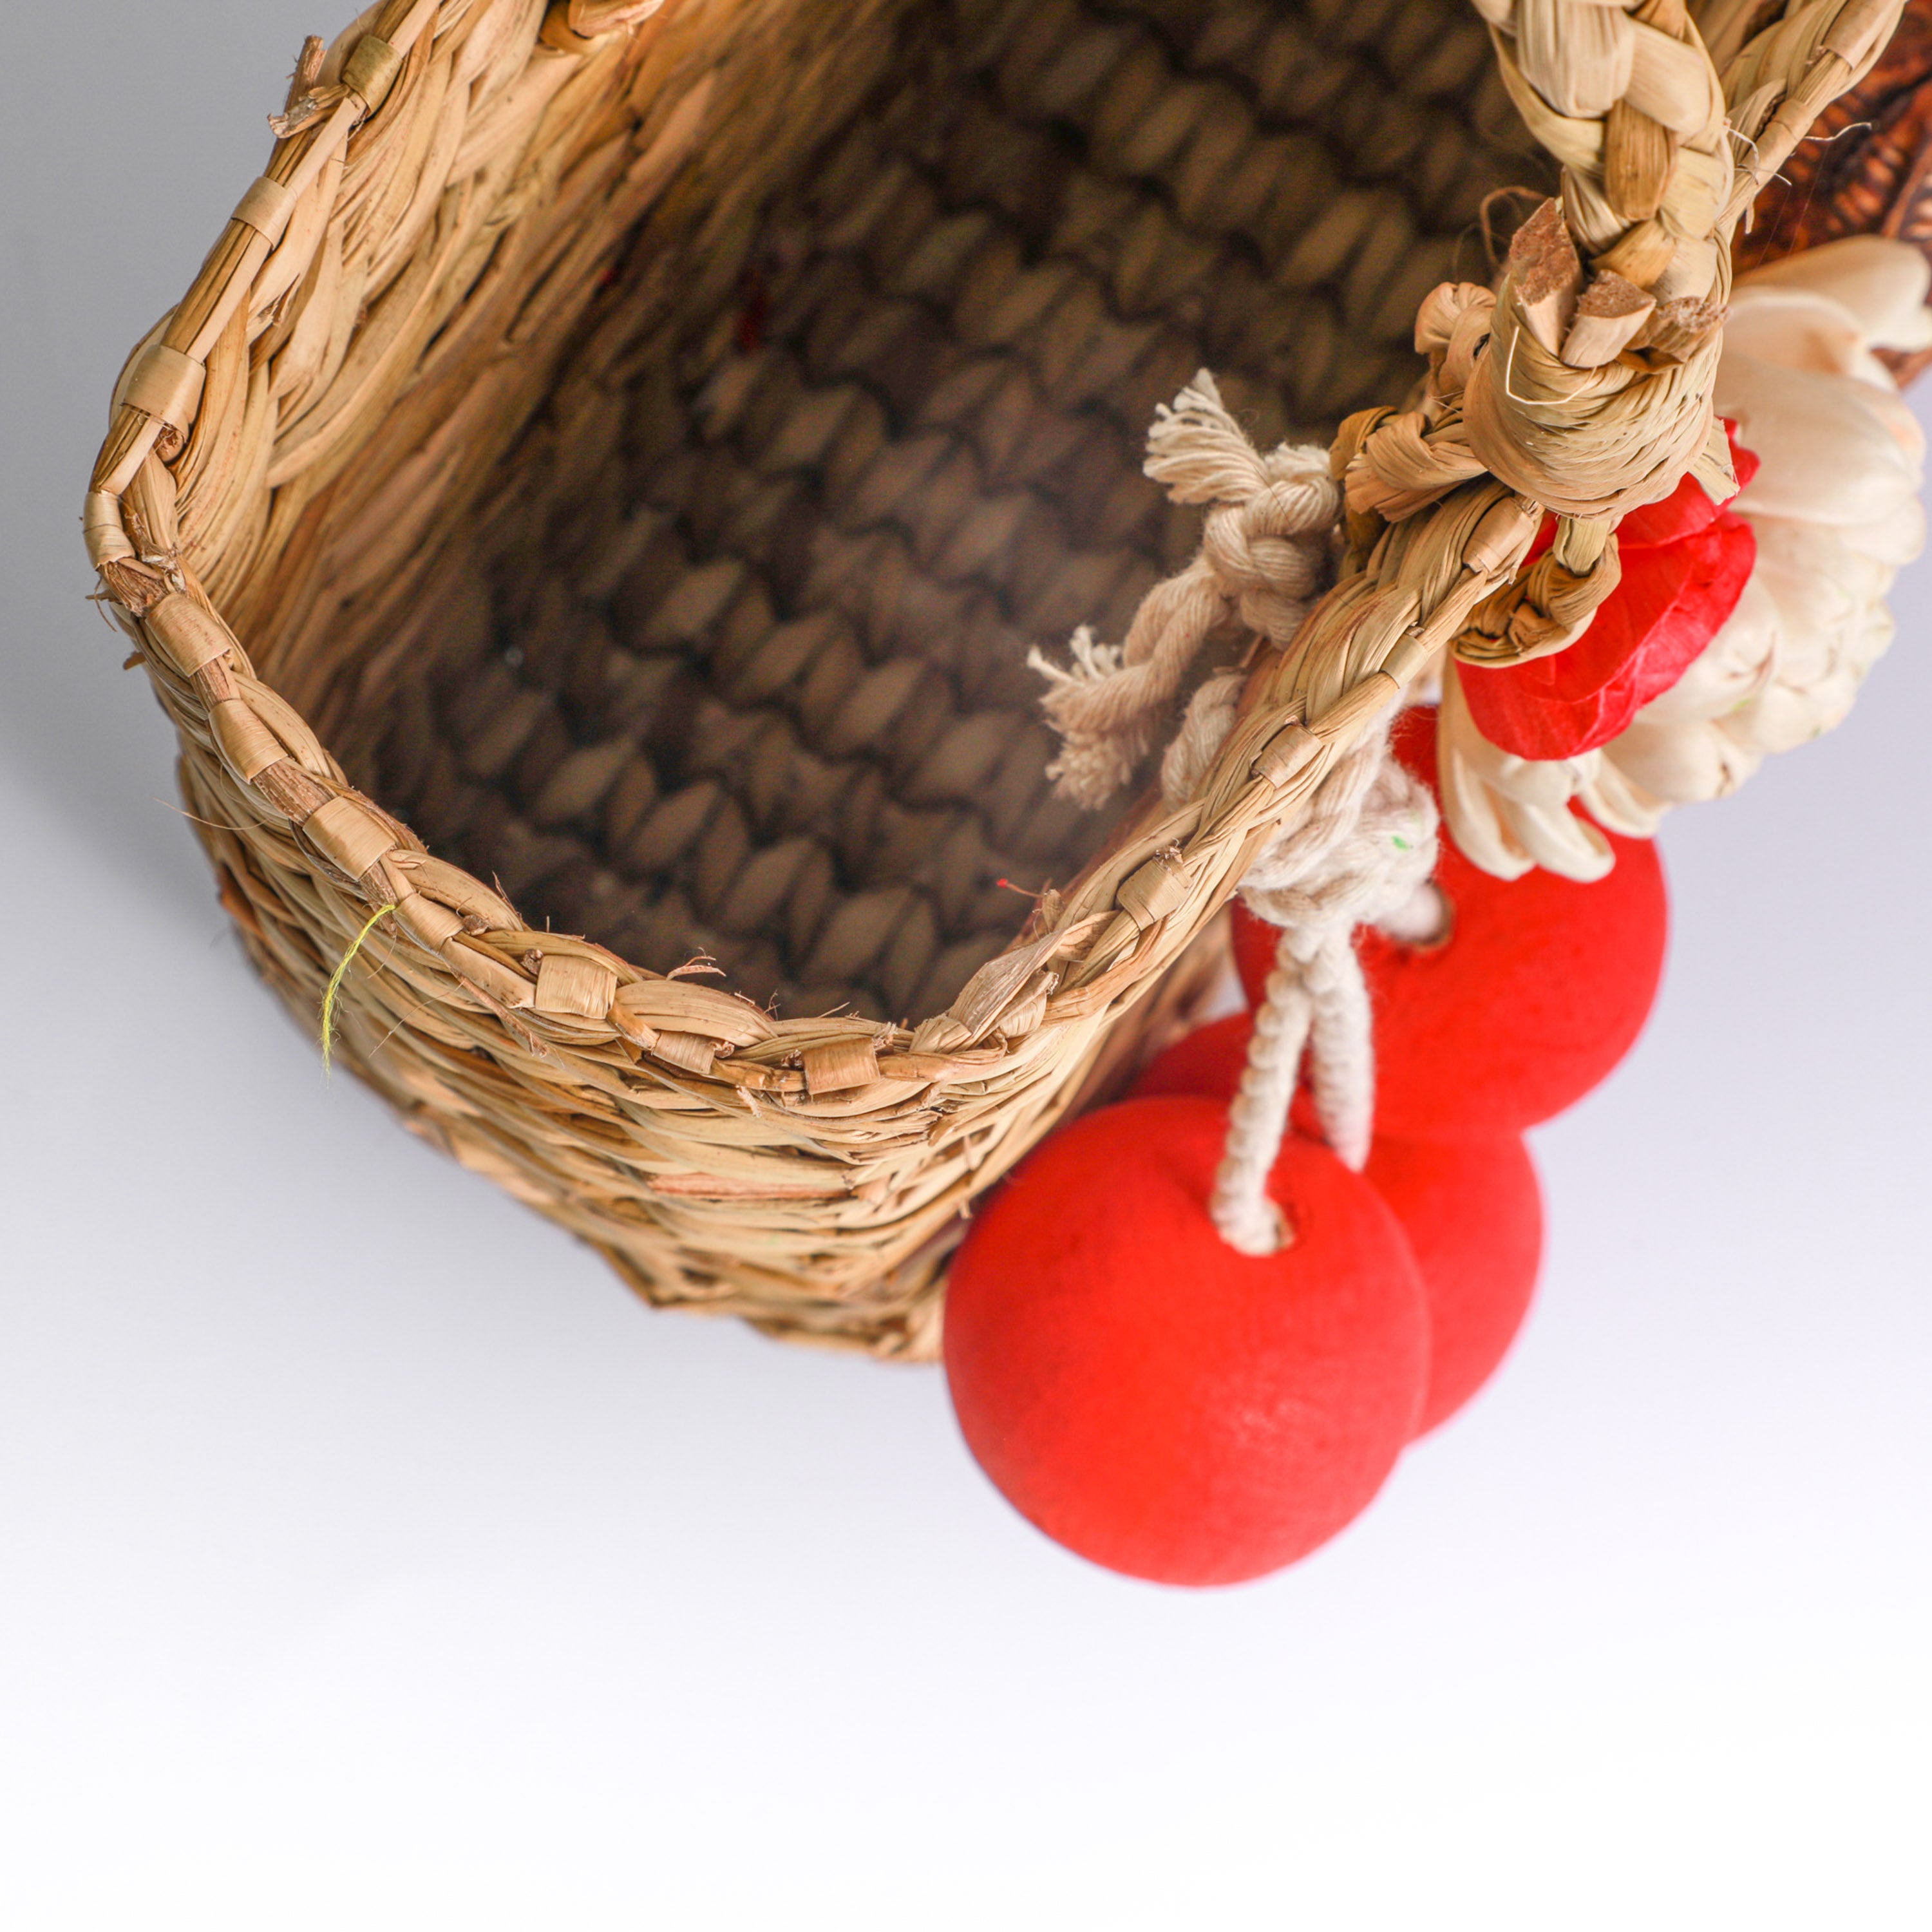 Woven baskets for return gifting online in the USA